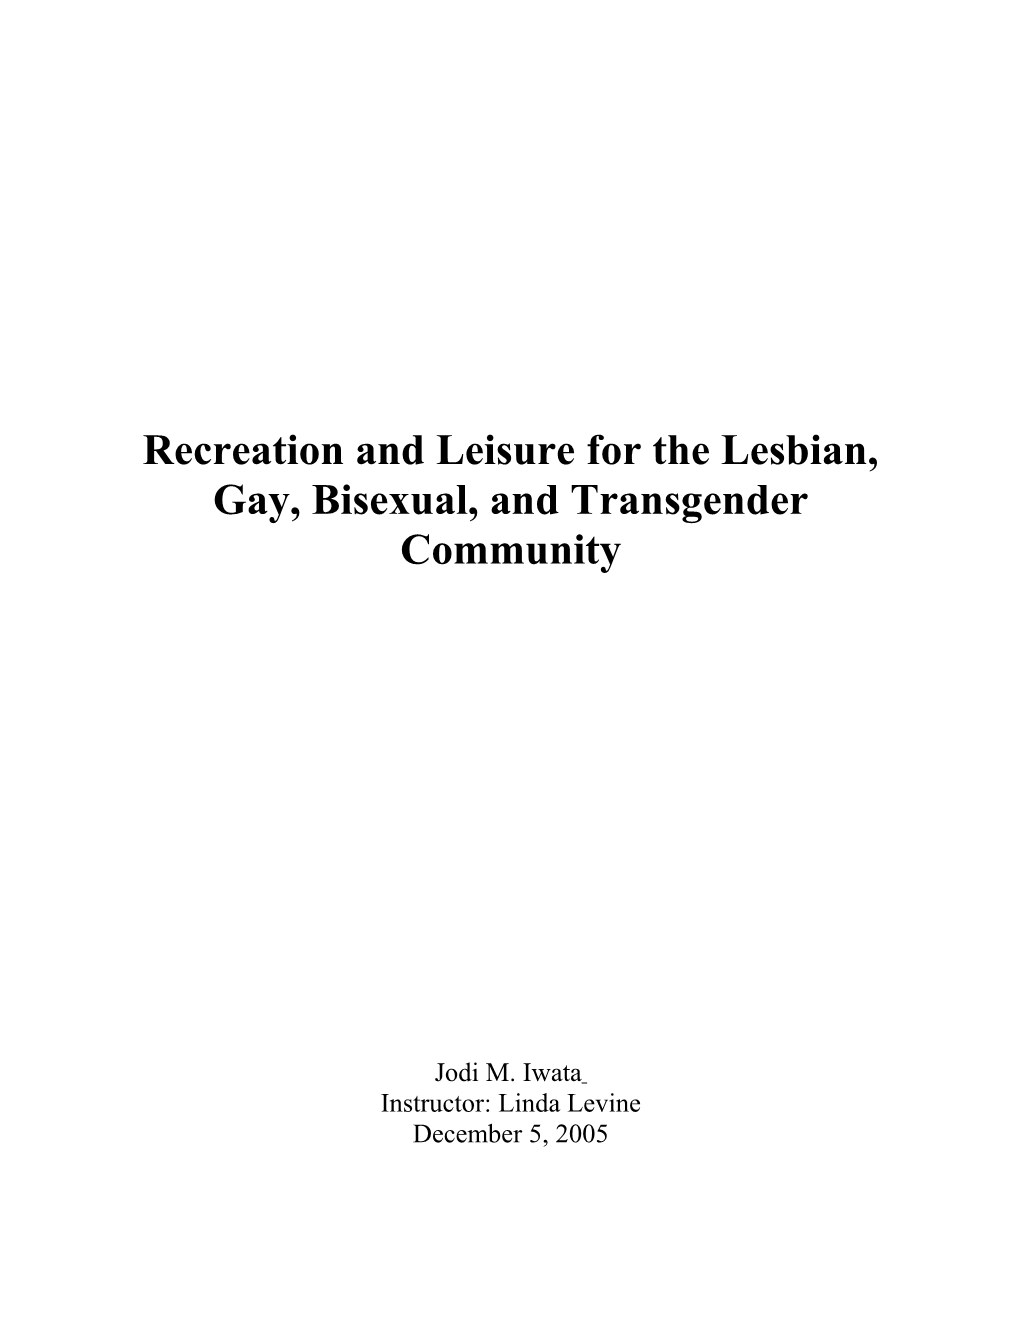 Leisure As a Human Right in the Lesbian, Gay, Bisexual, and Transsexual (LGBT) Community